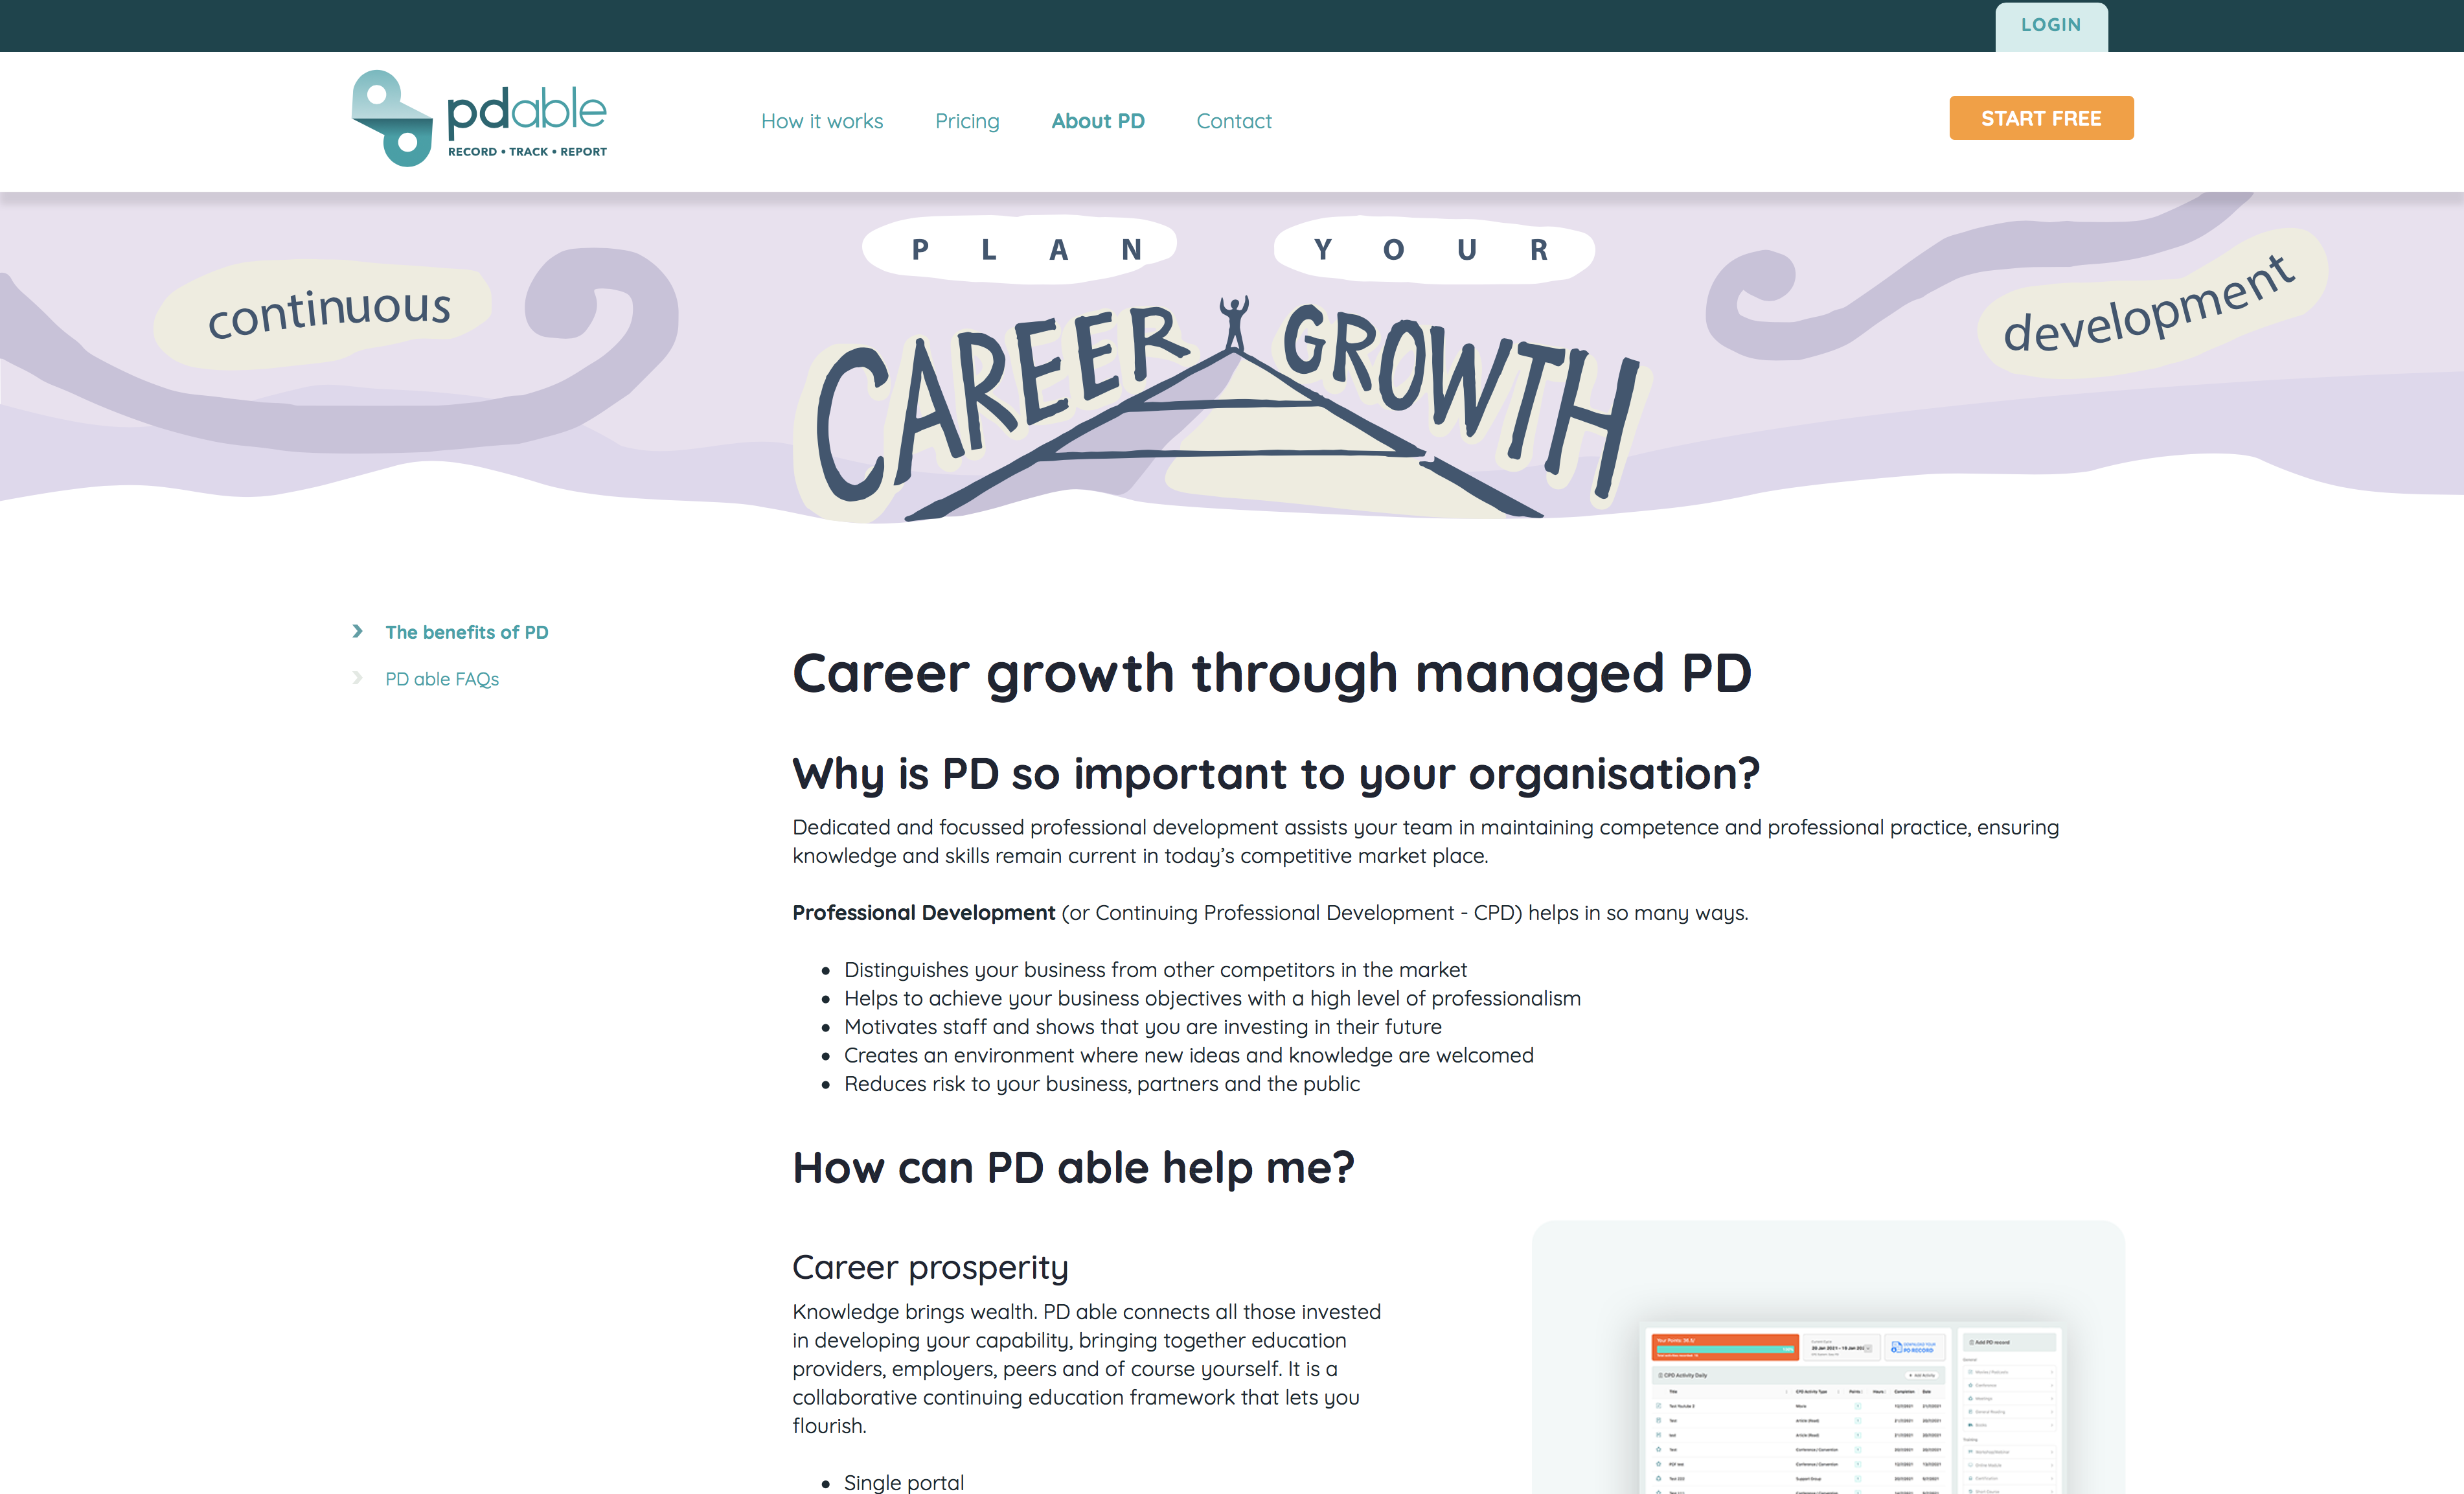 Career growth through managed CPD